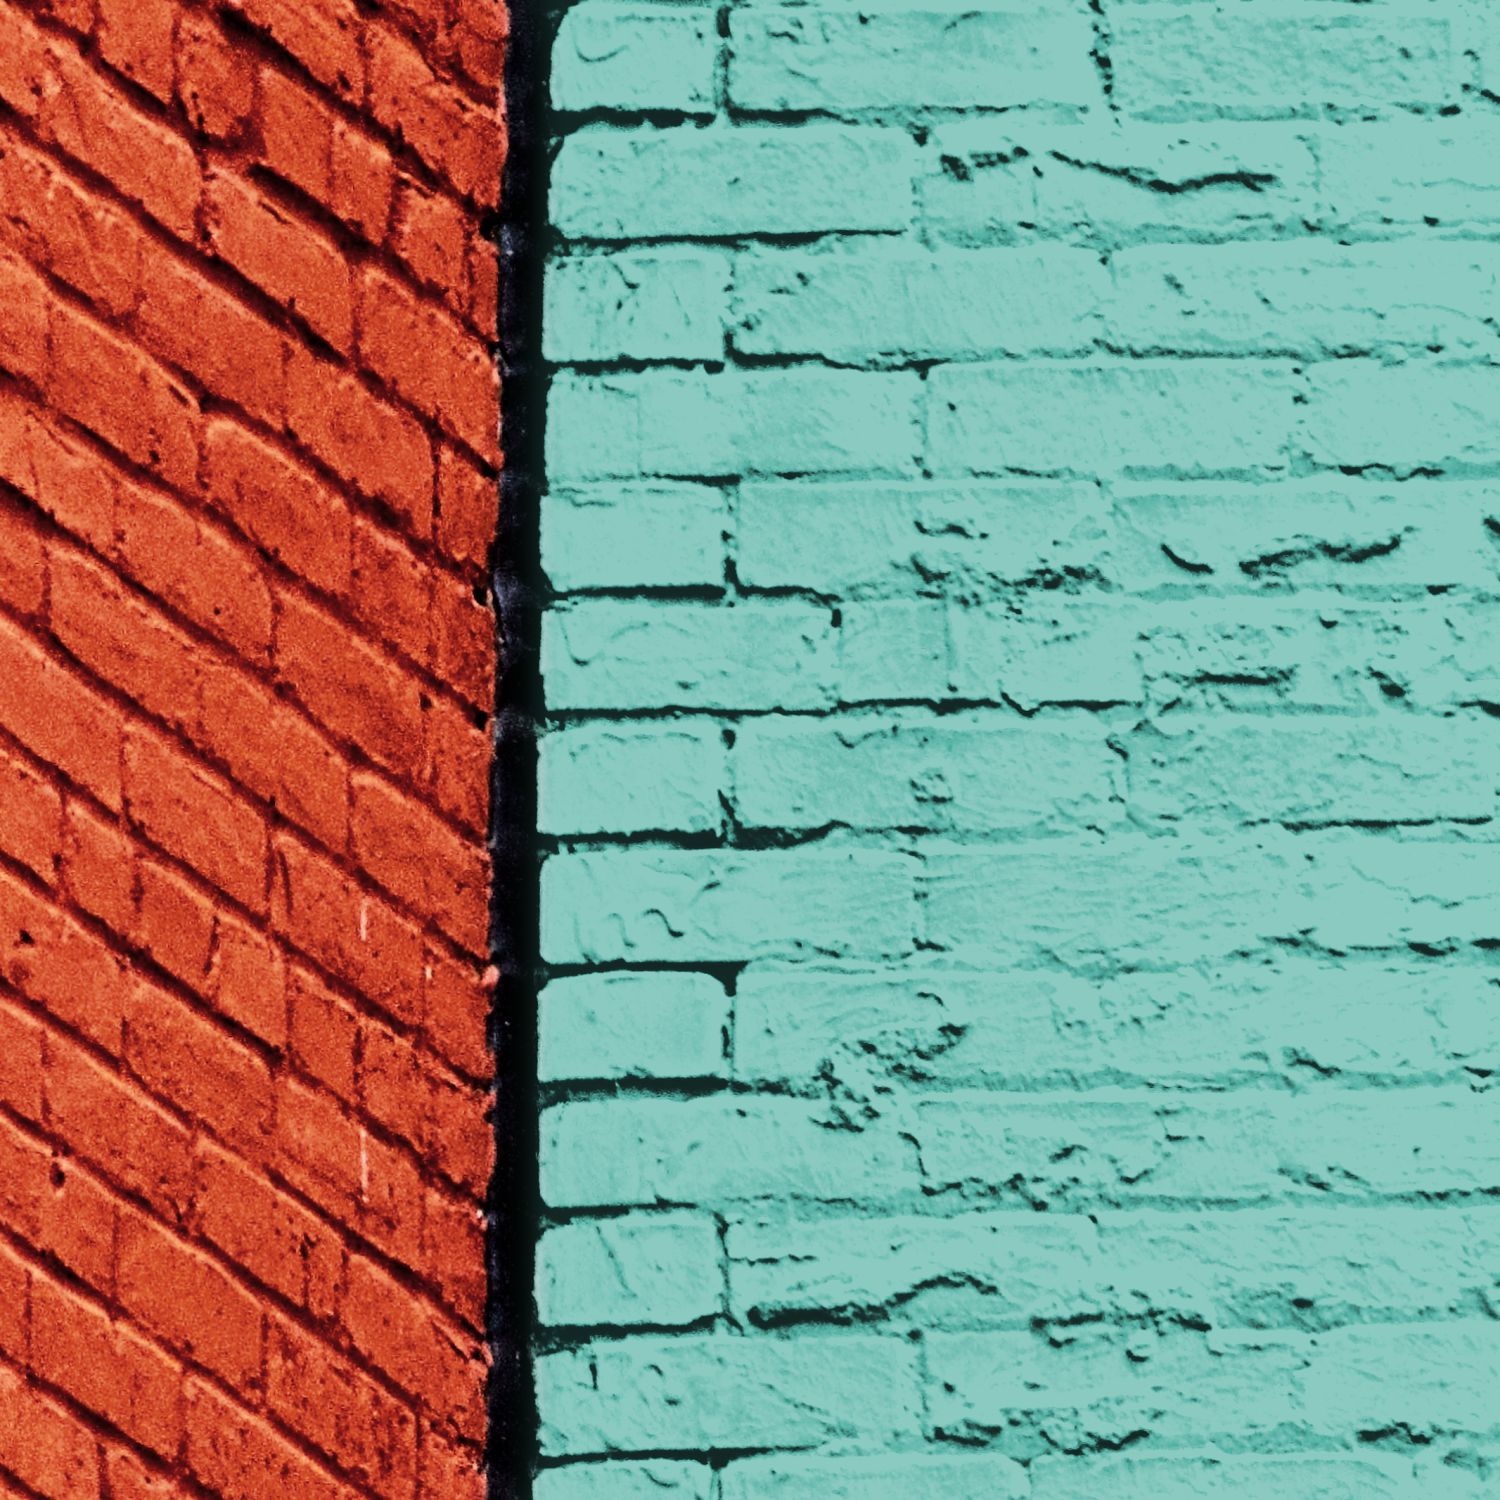 common easy home mistakes photograph of adjoining brick walls painted red and bluish-green colors